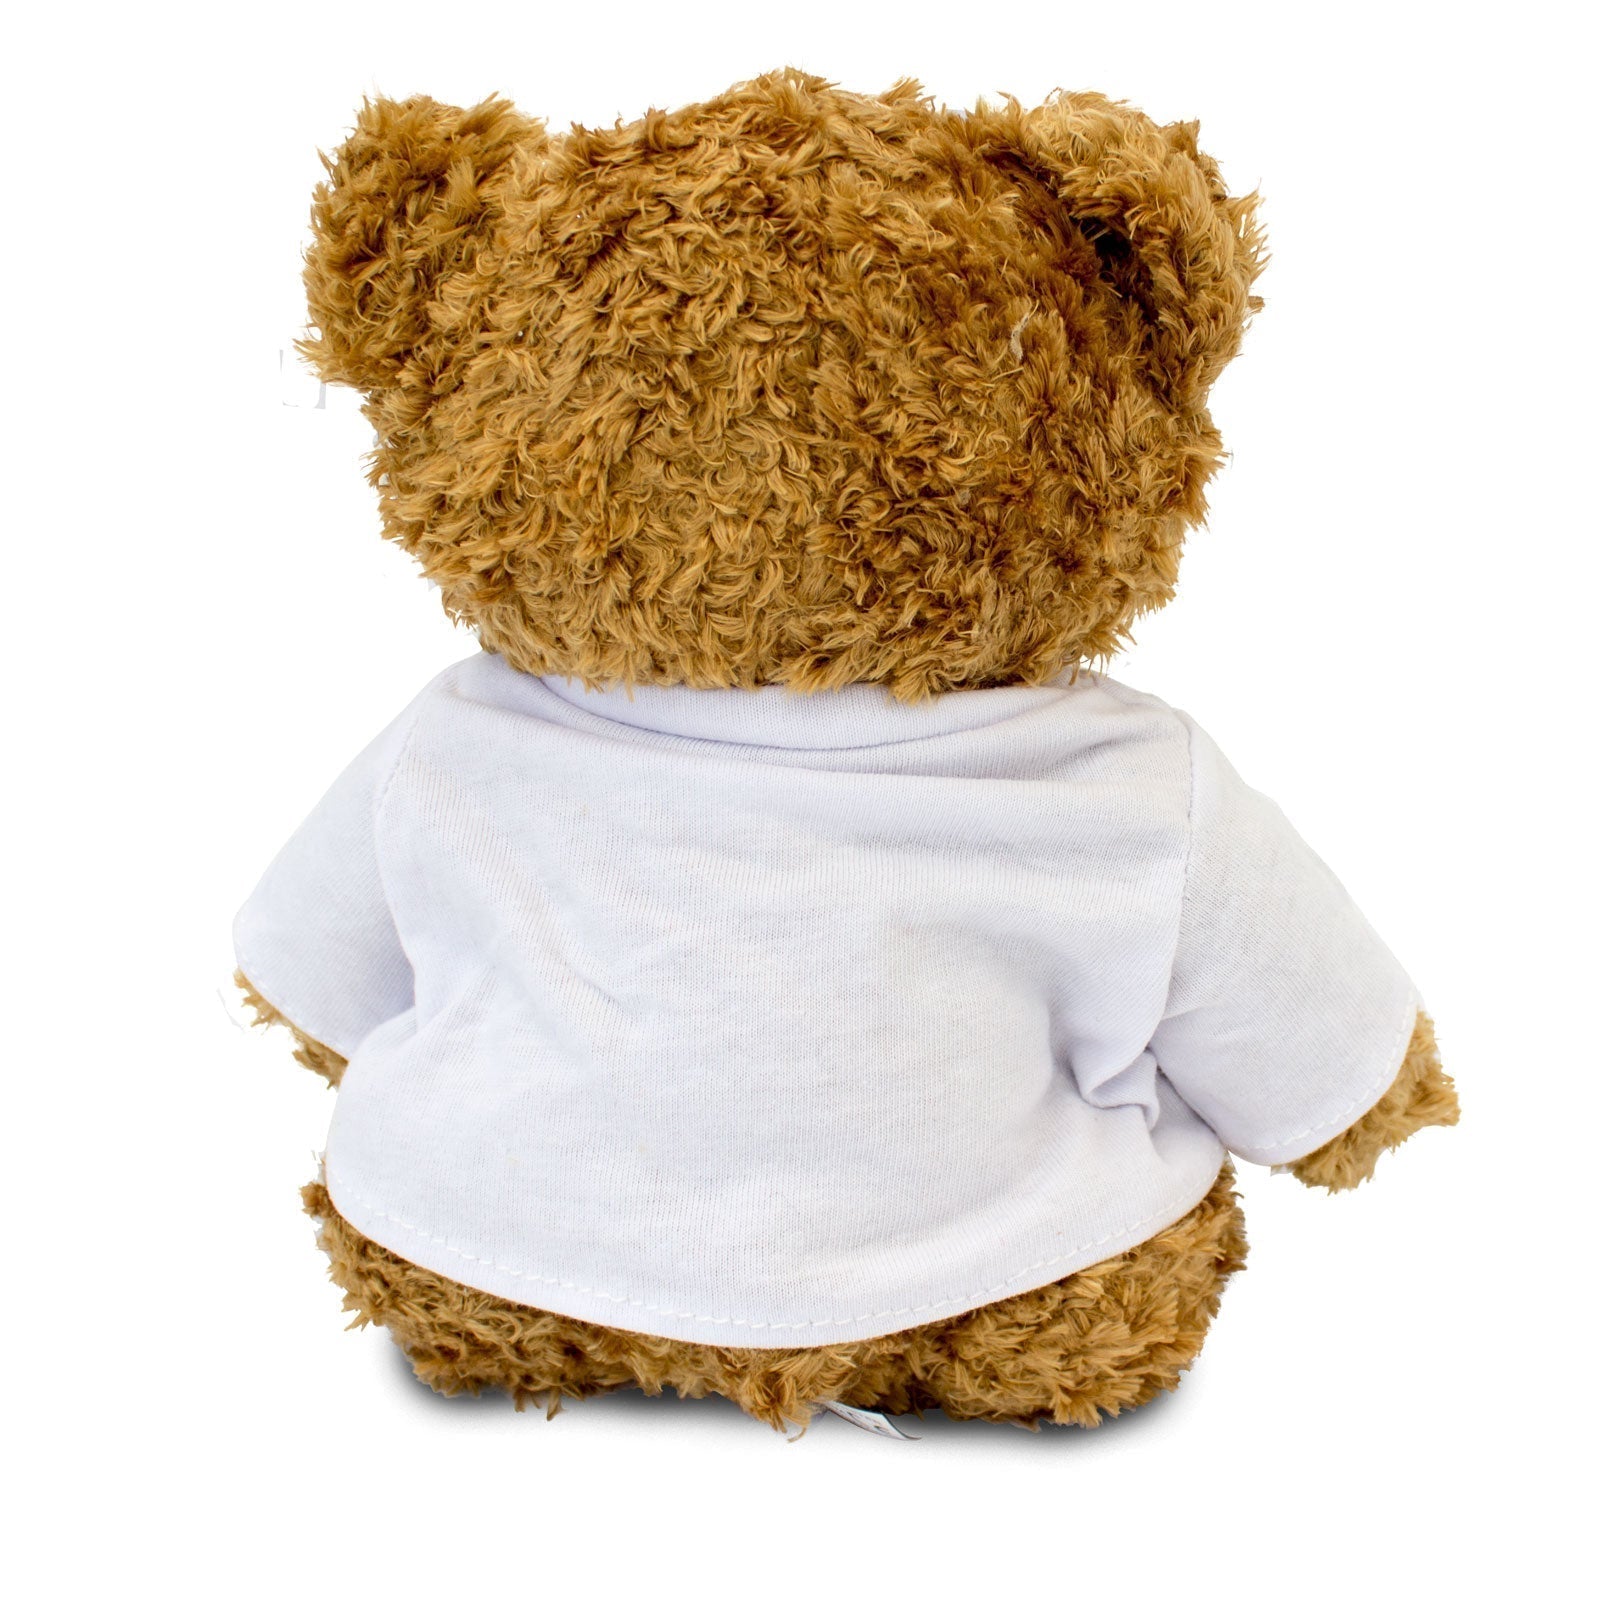 Amazing Dad Would Recommend - Teddy Bear - Gift Present